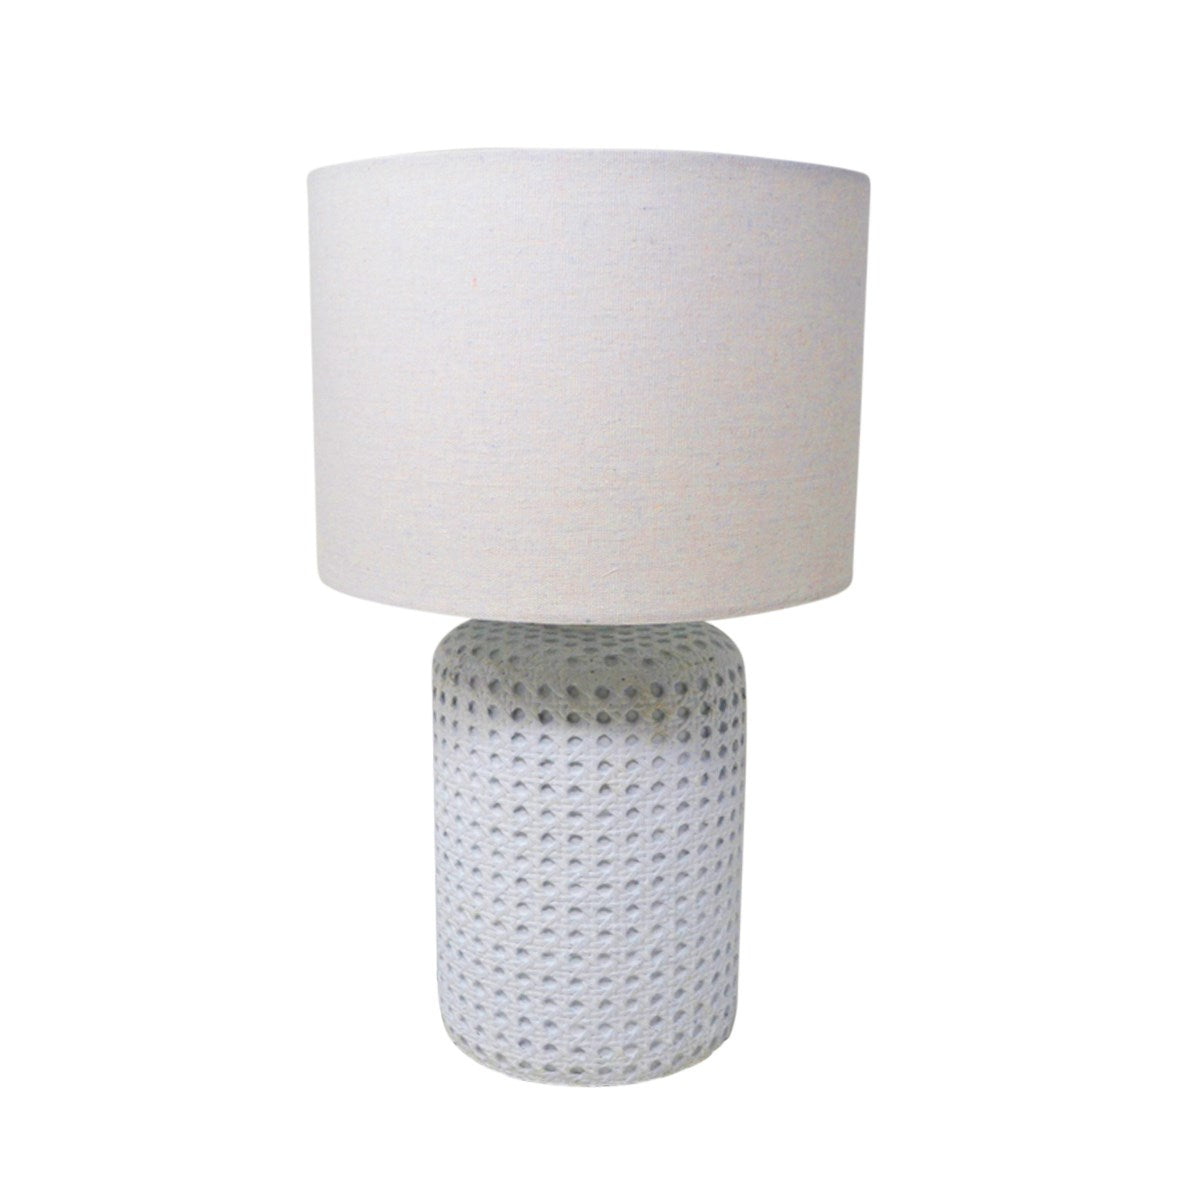 NOST LAMP DIMPLE